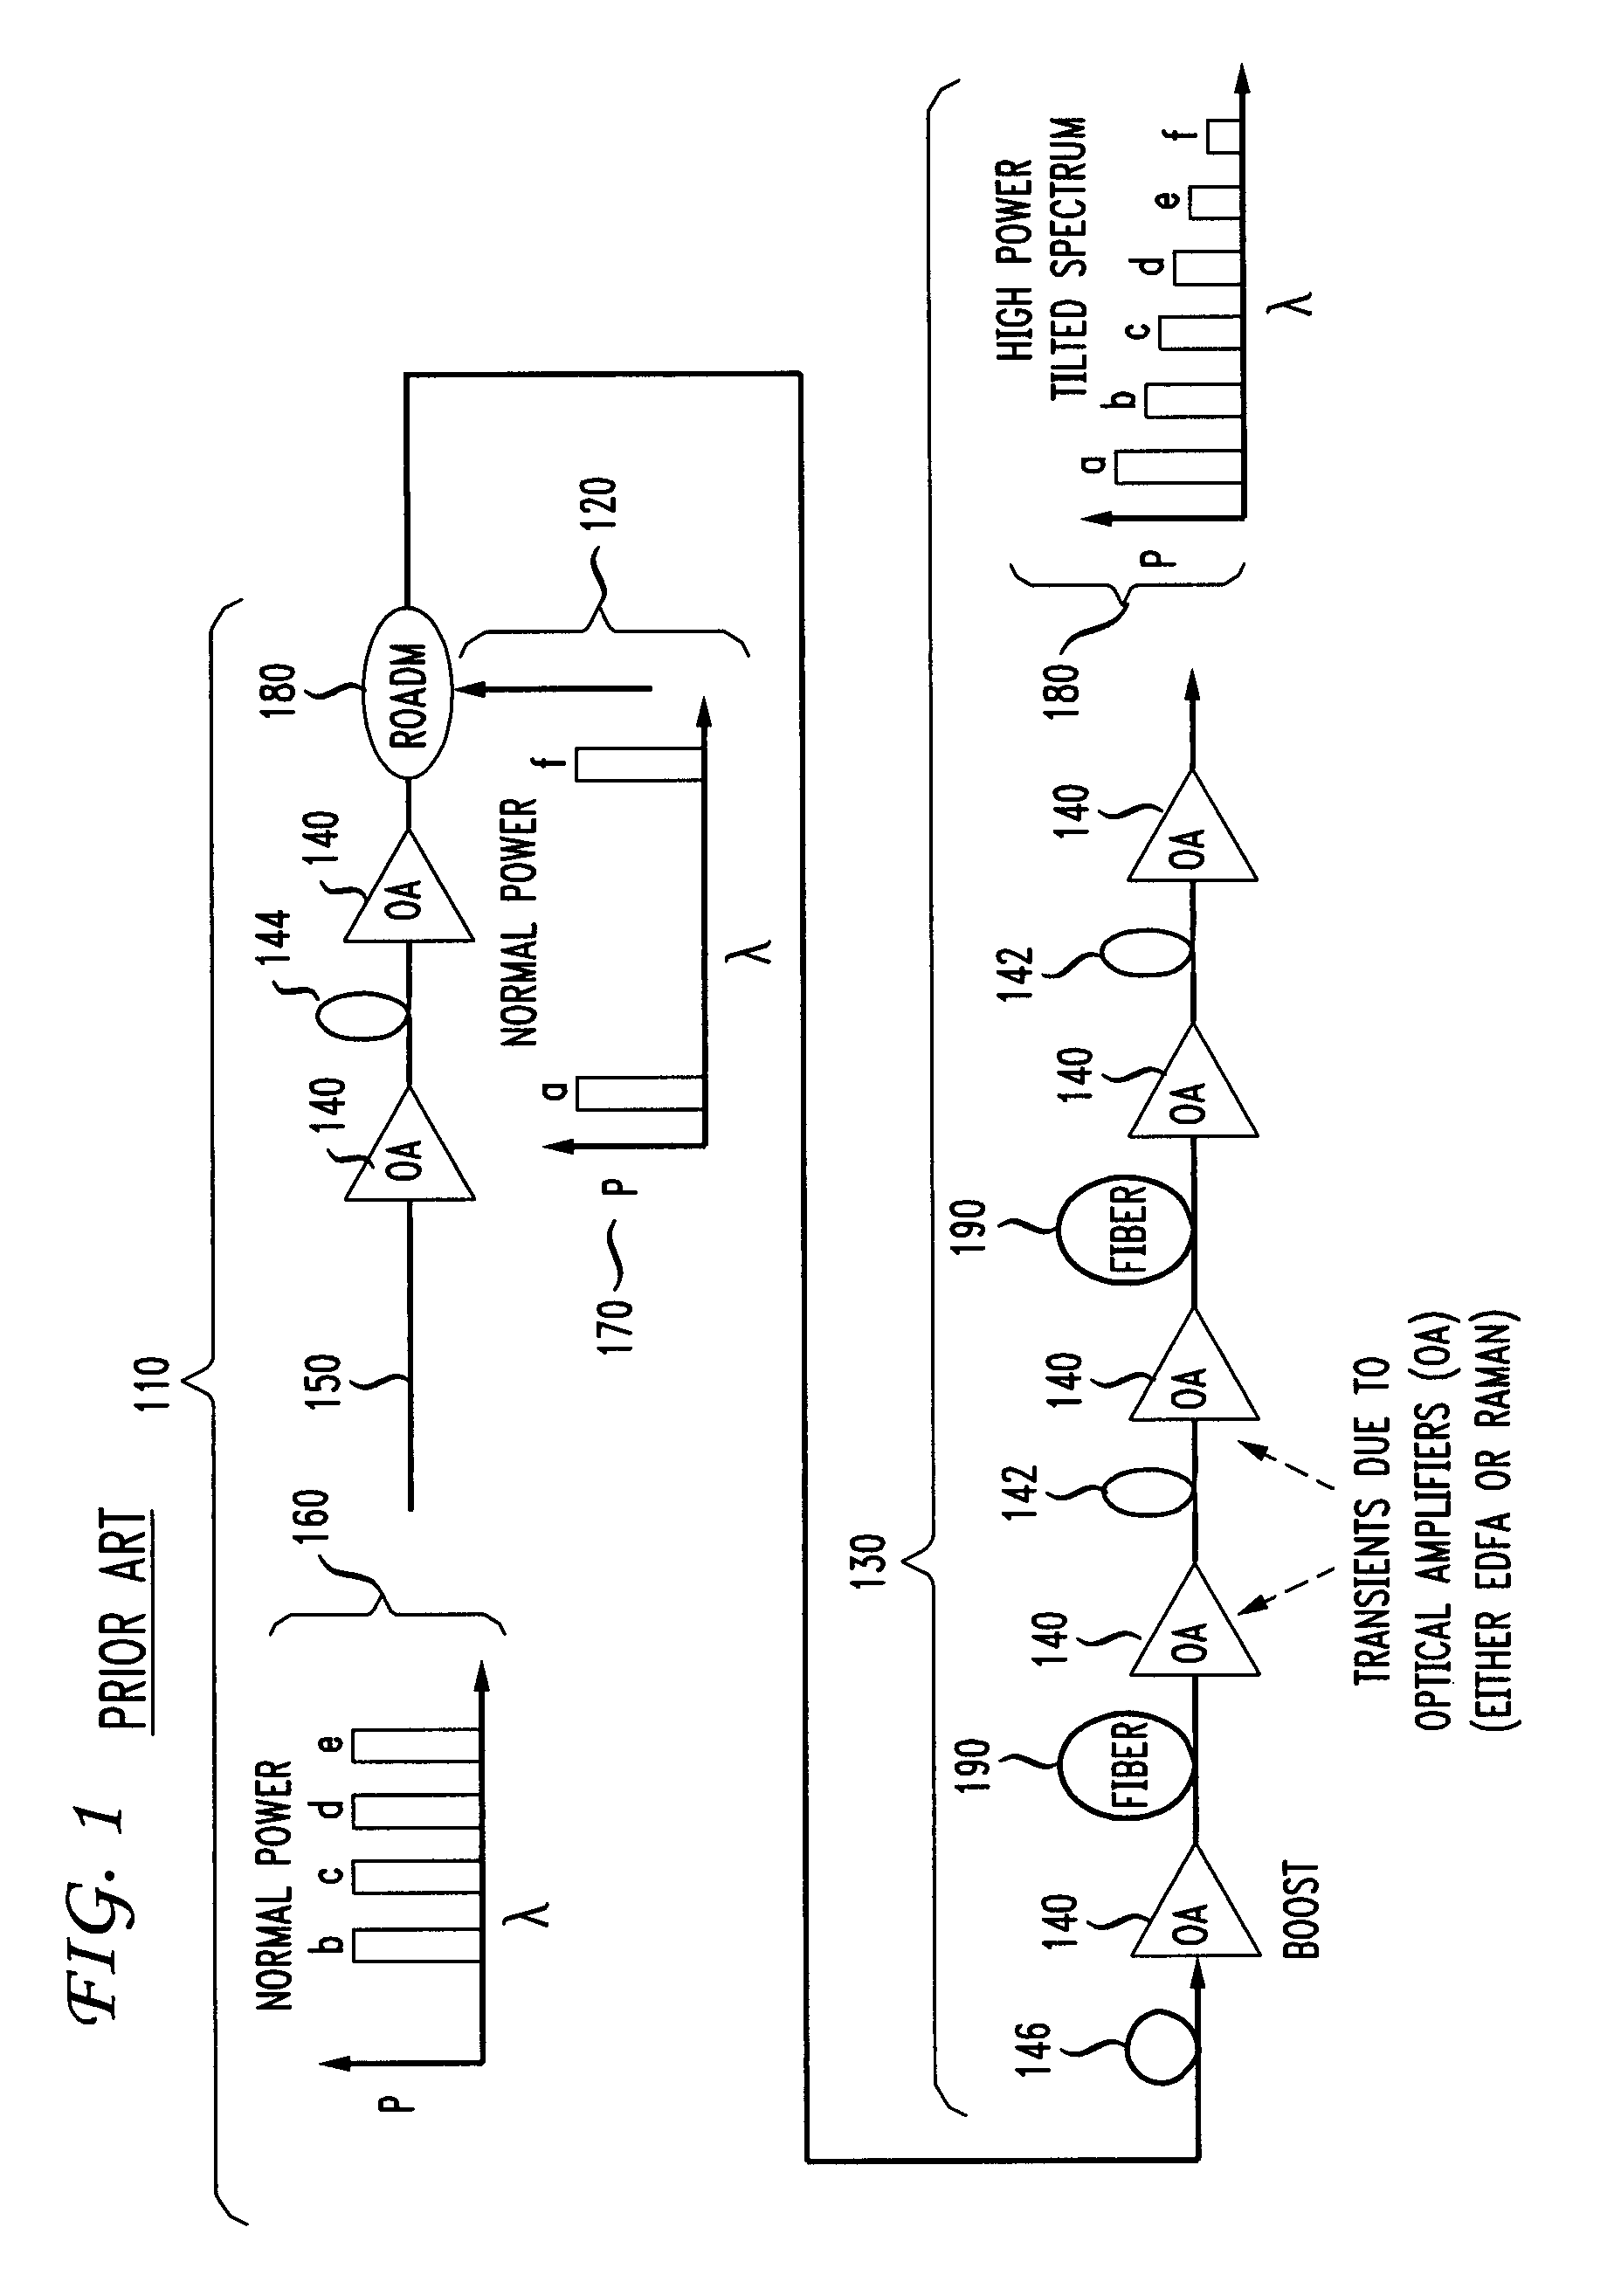 Method and apparatus for adjusting for polarization-induced, optical signal transients